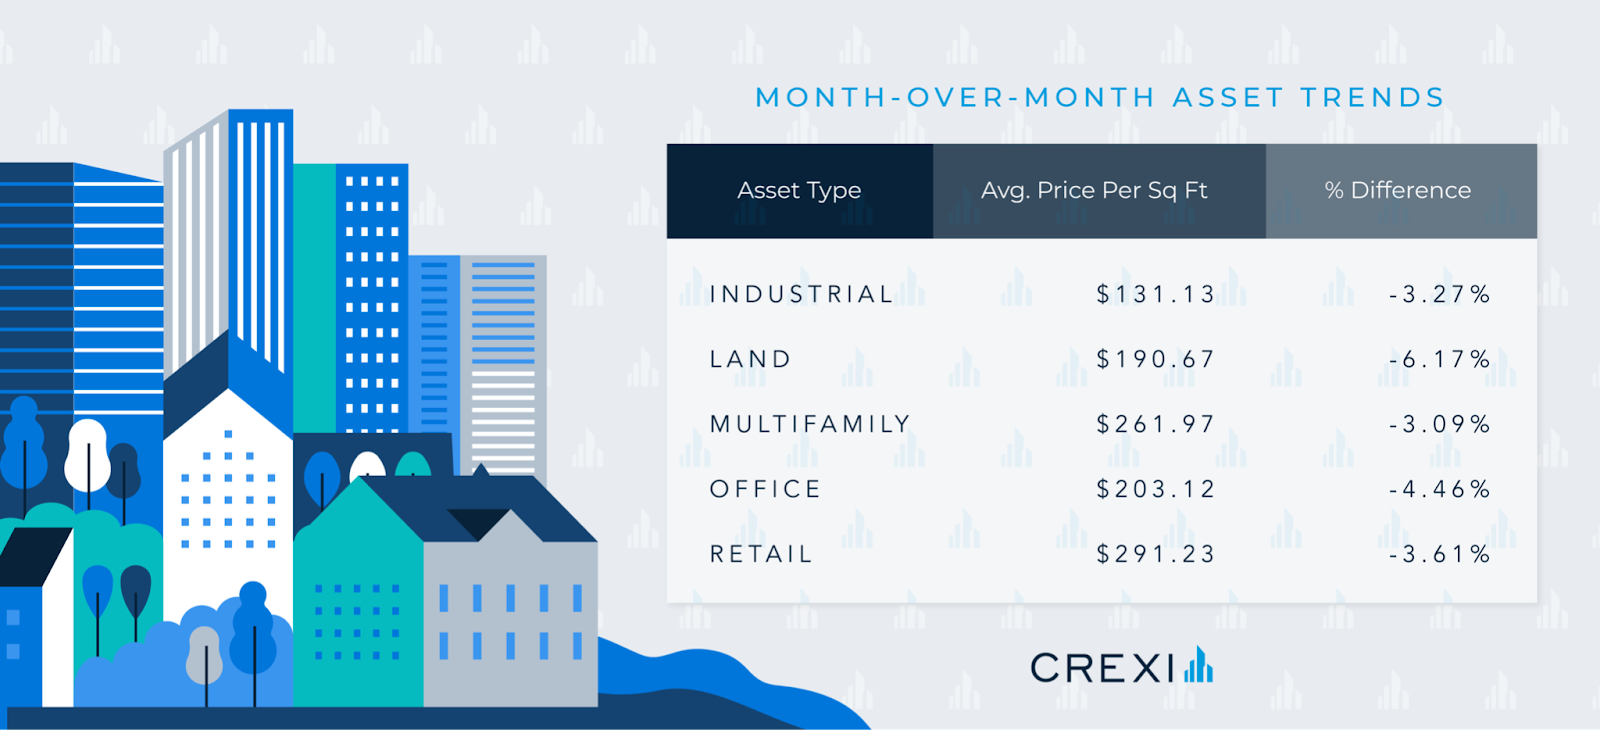 Average Asking Price per Square Foot in July and Changes Month-over-Month